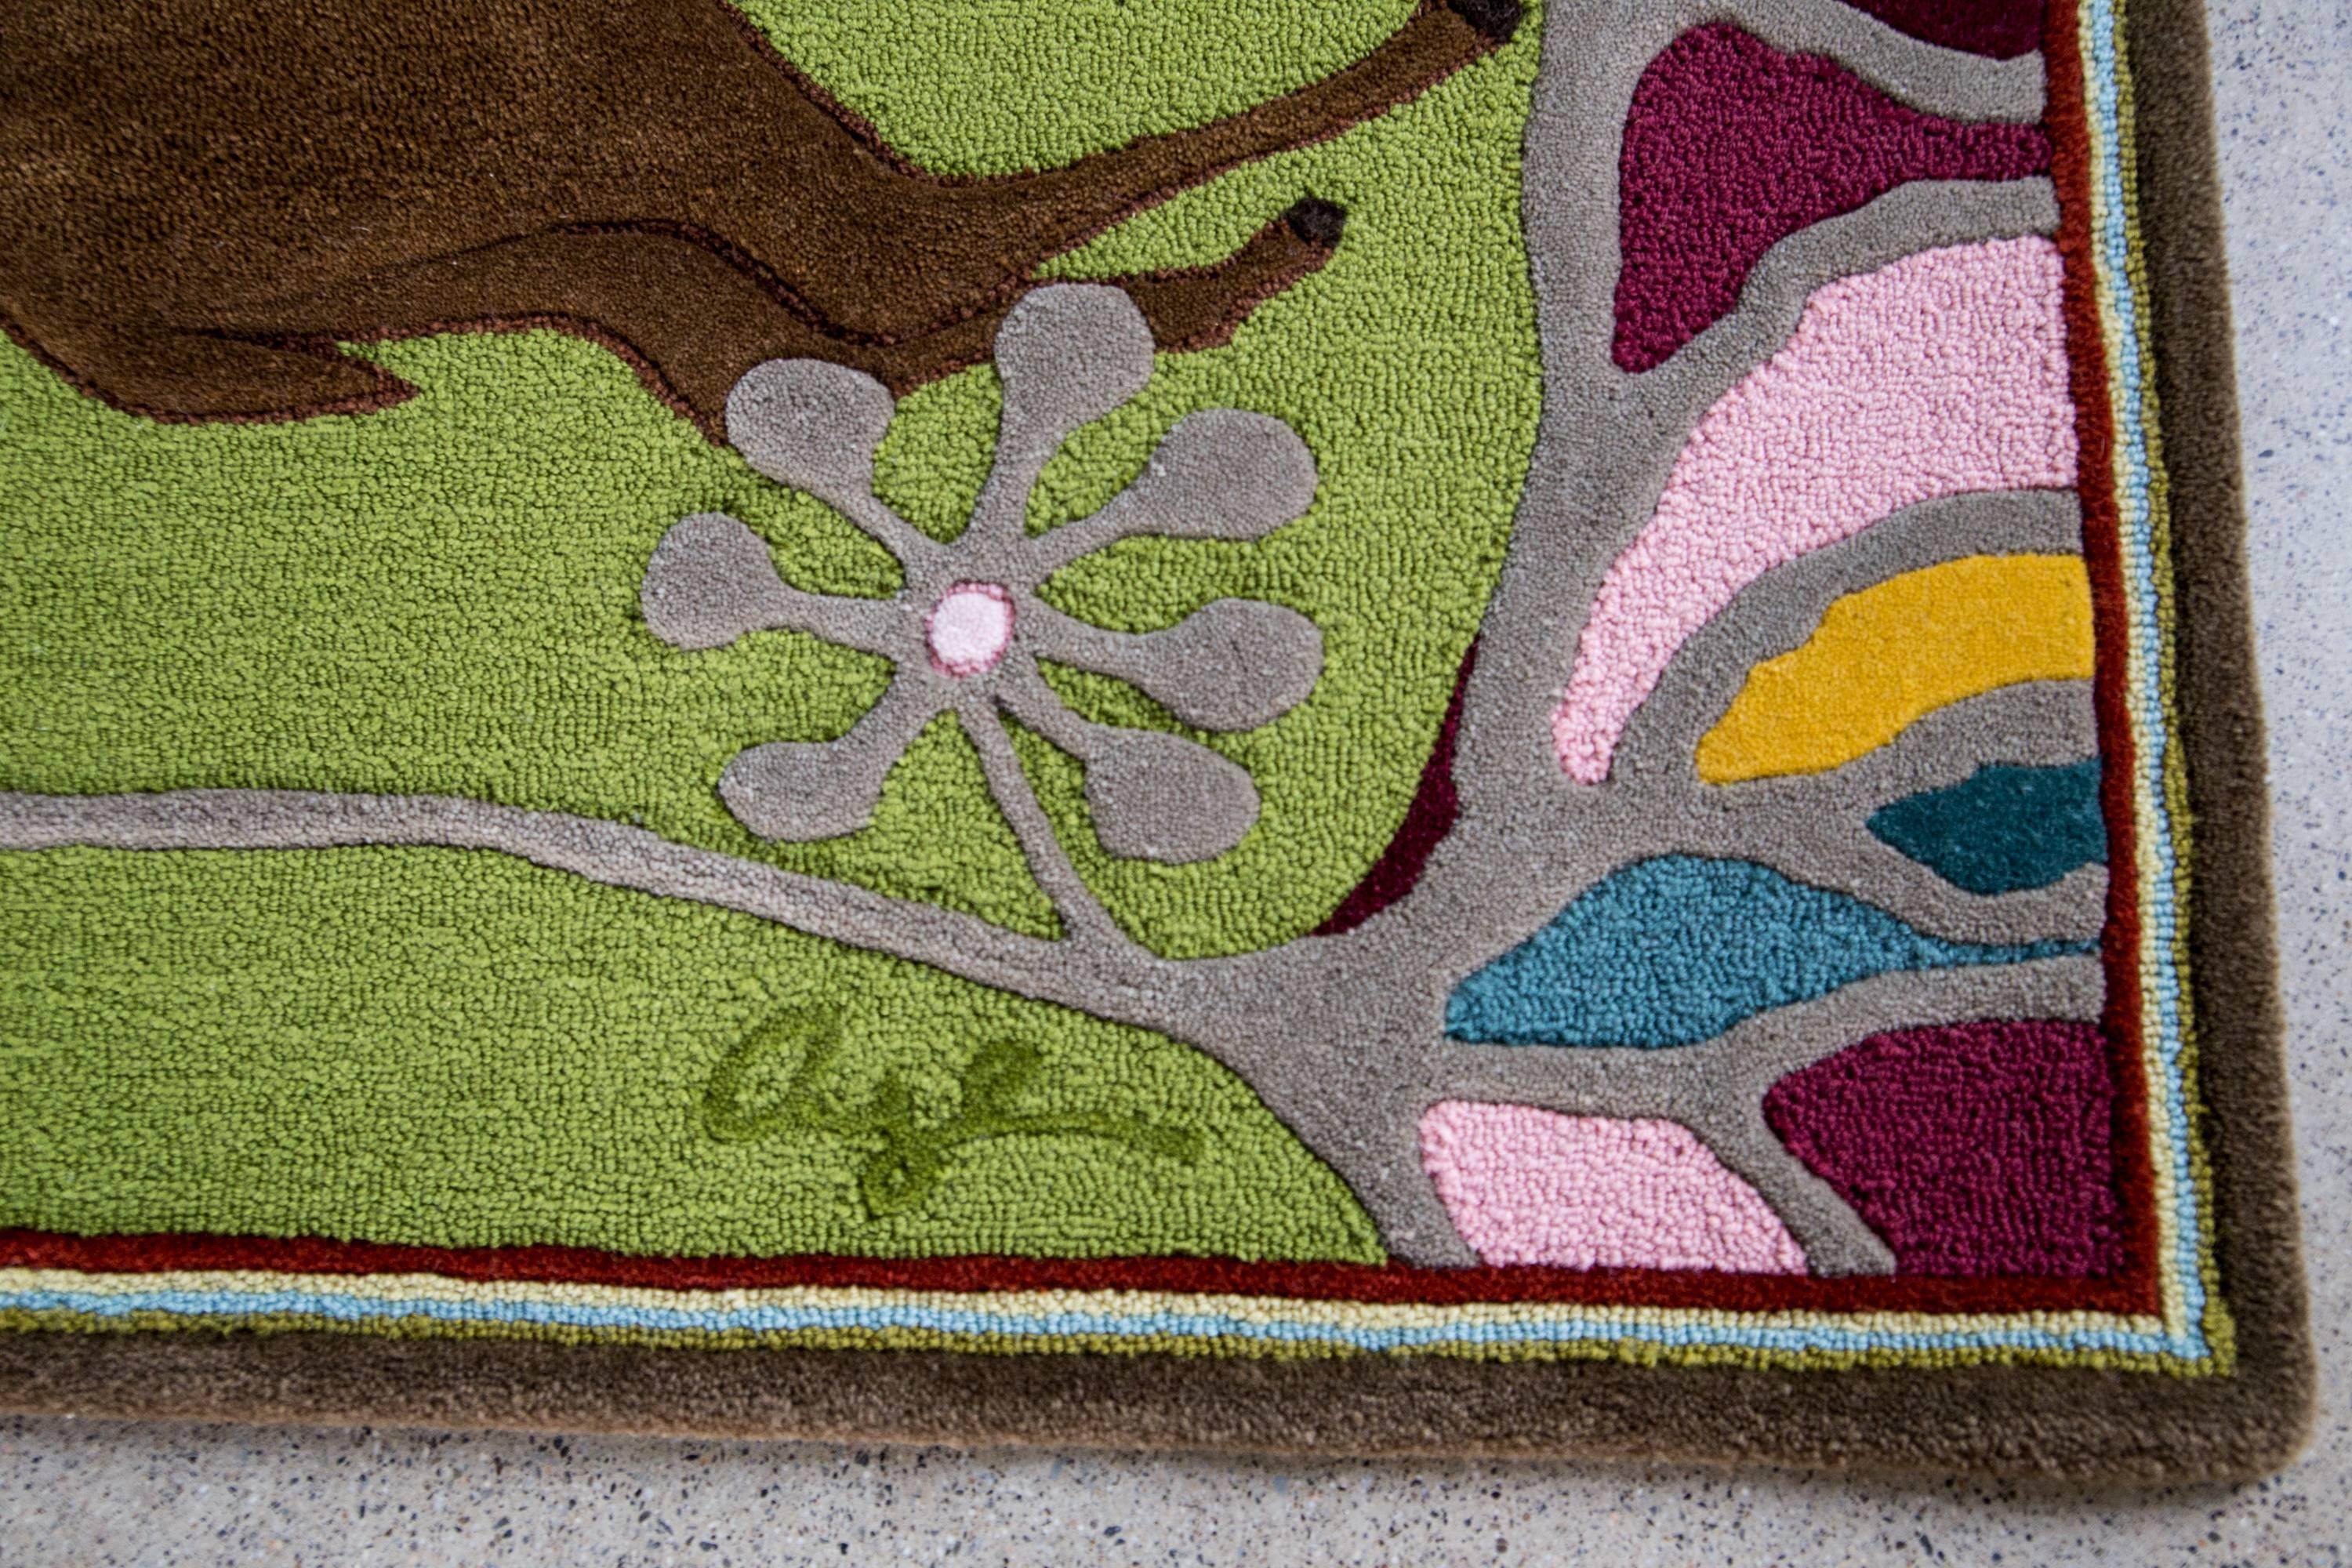 American Angela Adams Easton's Pond Area Rug & Tapestry, One-of-a-kind, Handcrafted Wool For Sale